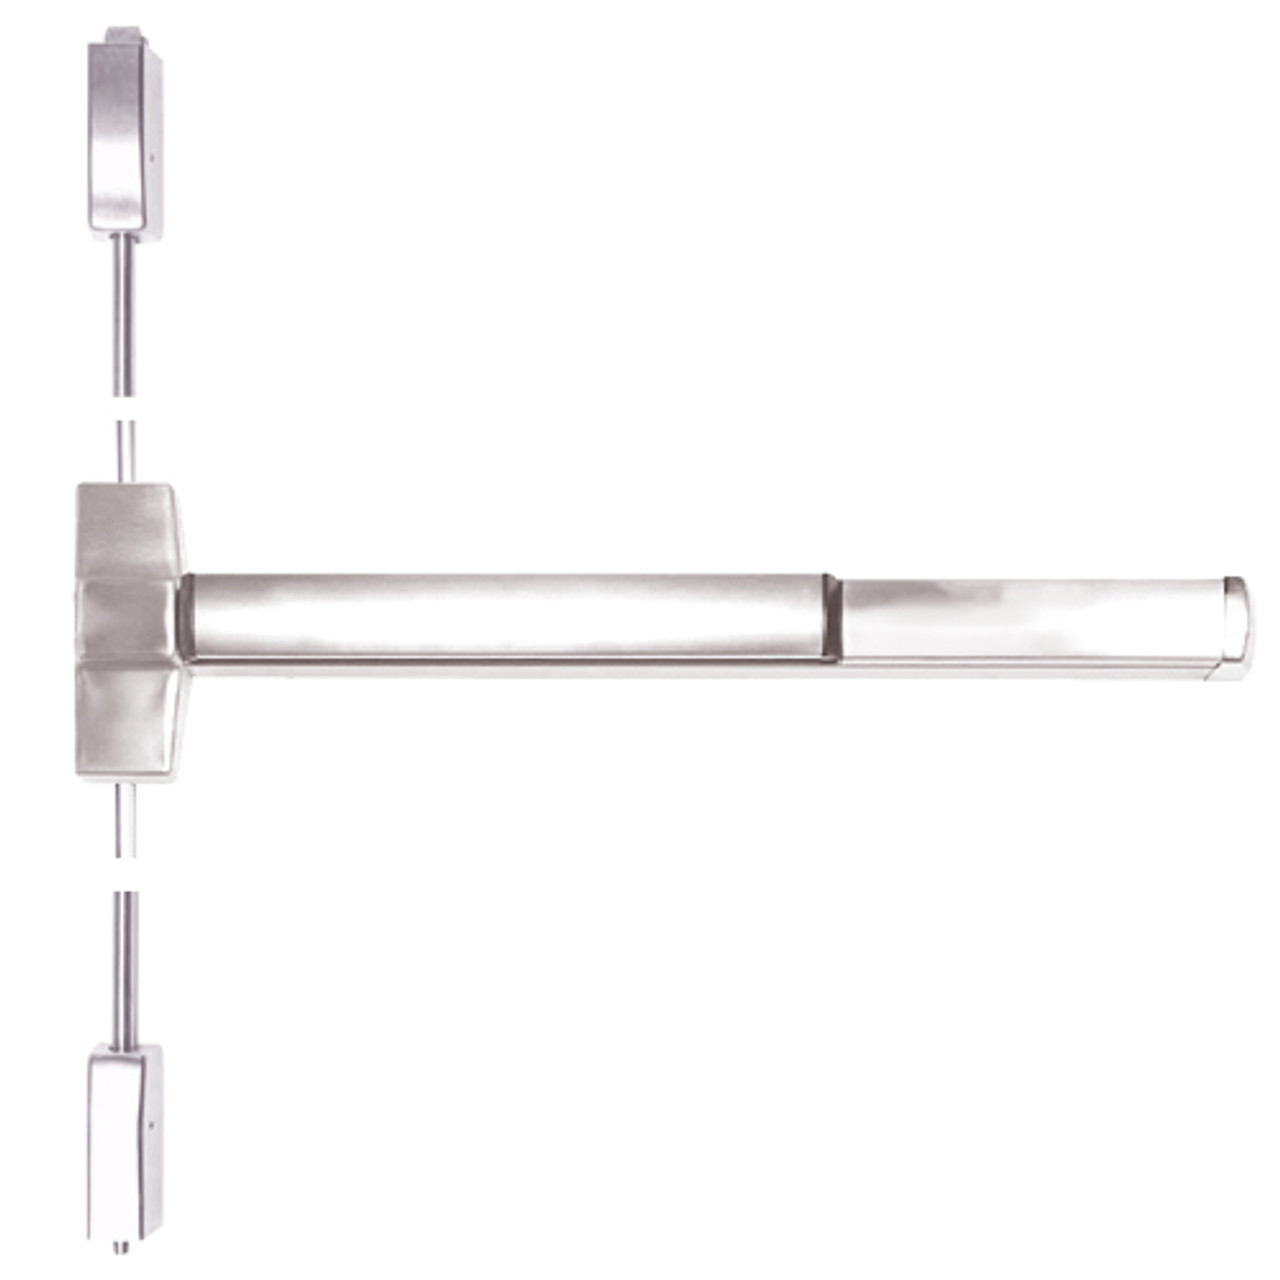 ED5470B-629 Corbin ED5400 Series Fire Rated Vertical Rod Exit Device in Bright Stainless Steel Finish